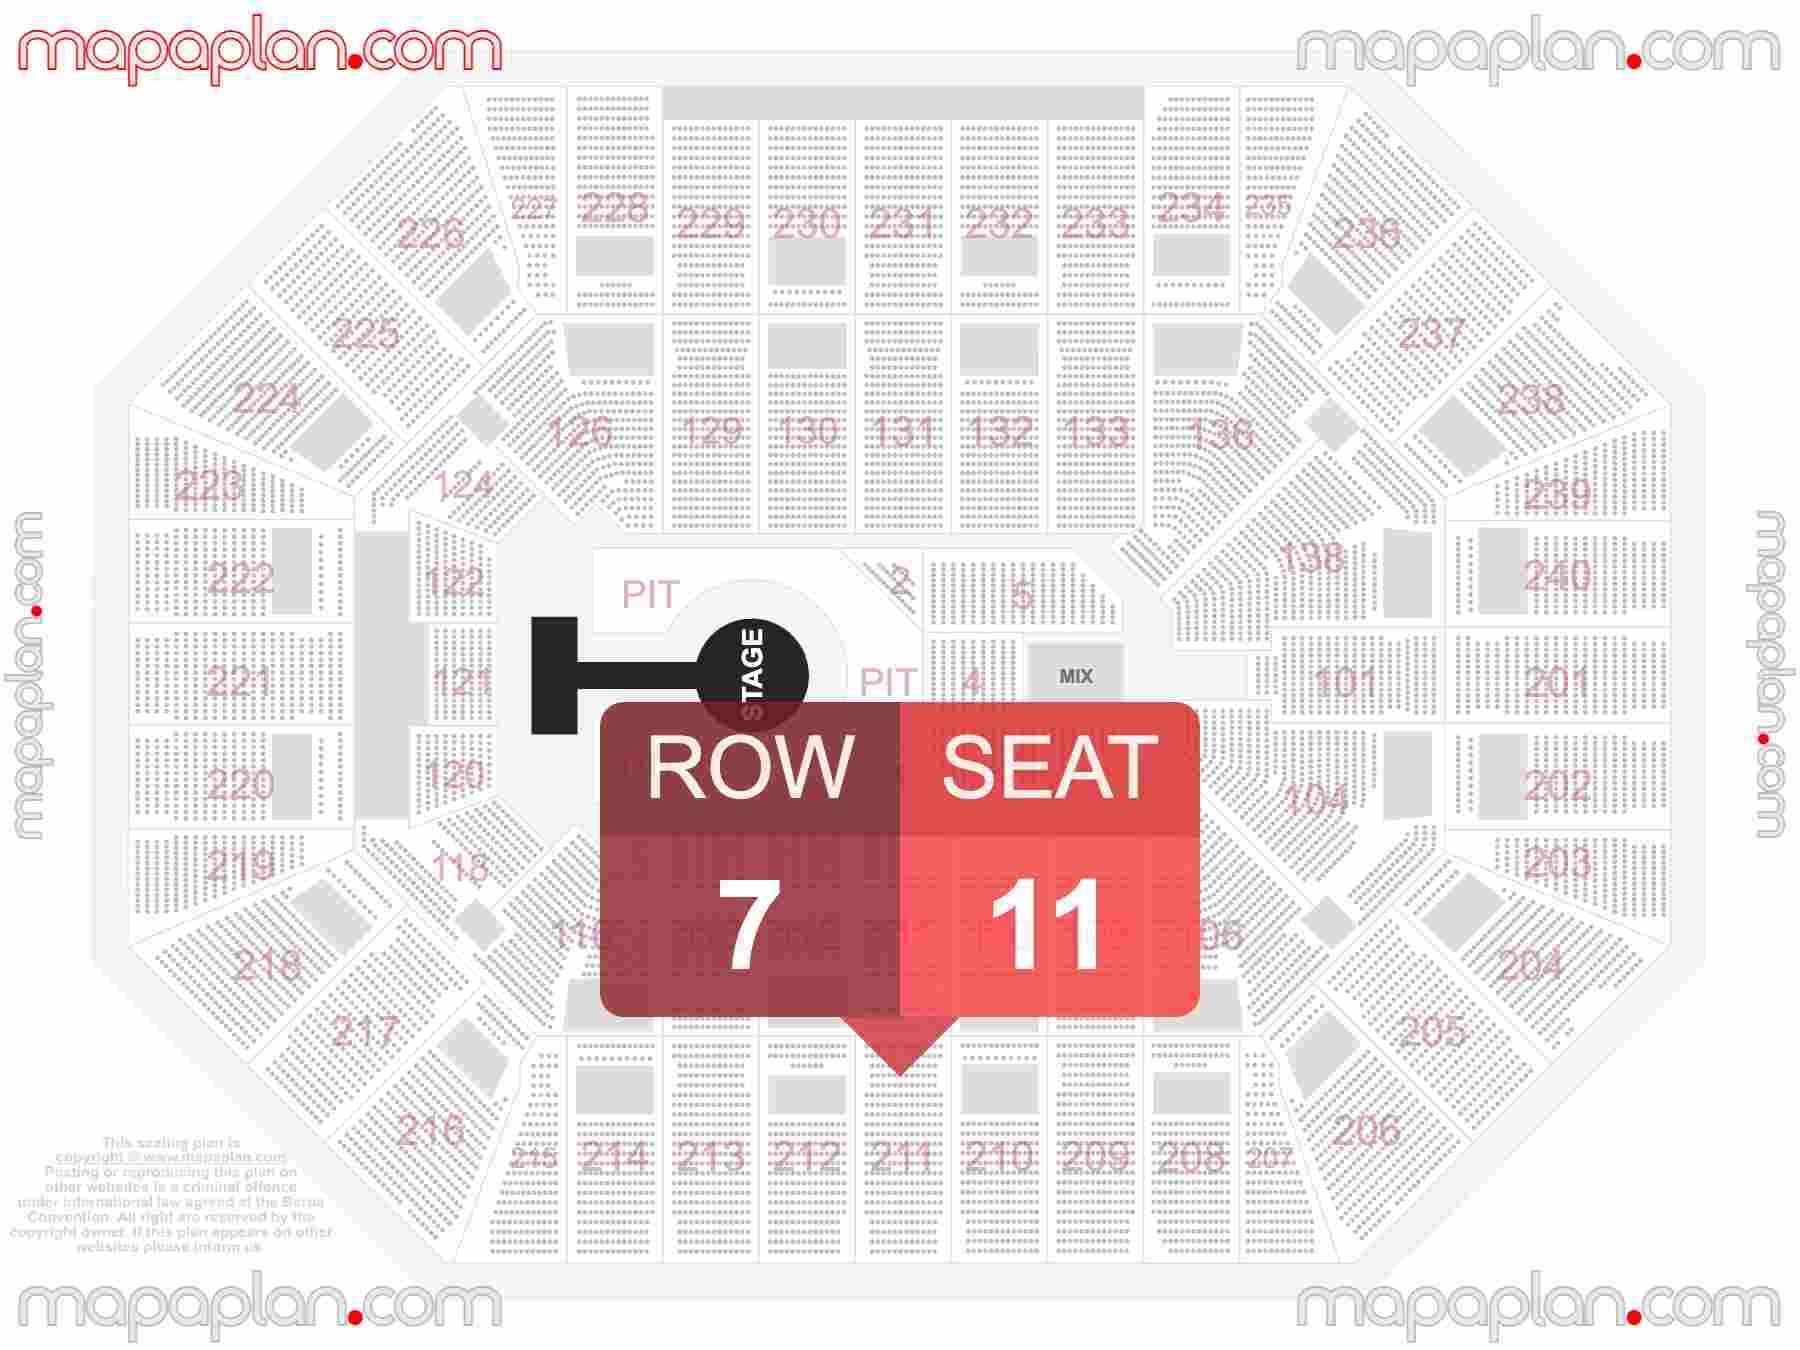 Minneapolis Target Center seating chart Catwalk extended runway concert B-stage inside capacity view arrangement plan - Interactive virtual 3d best seats & rows detailed stadium image configuration layout